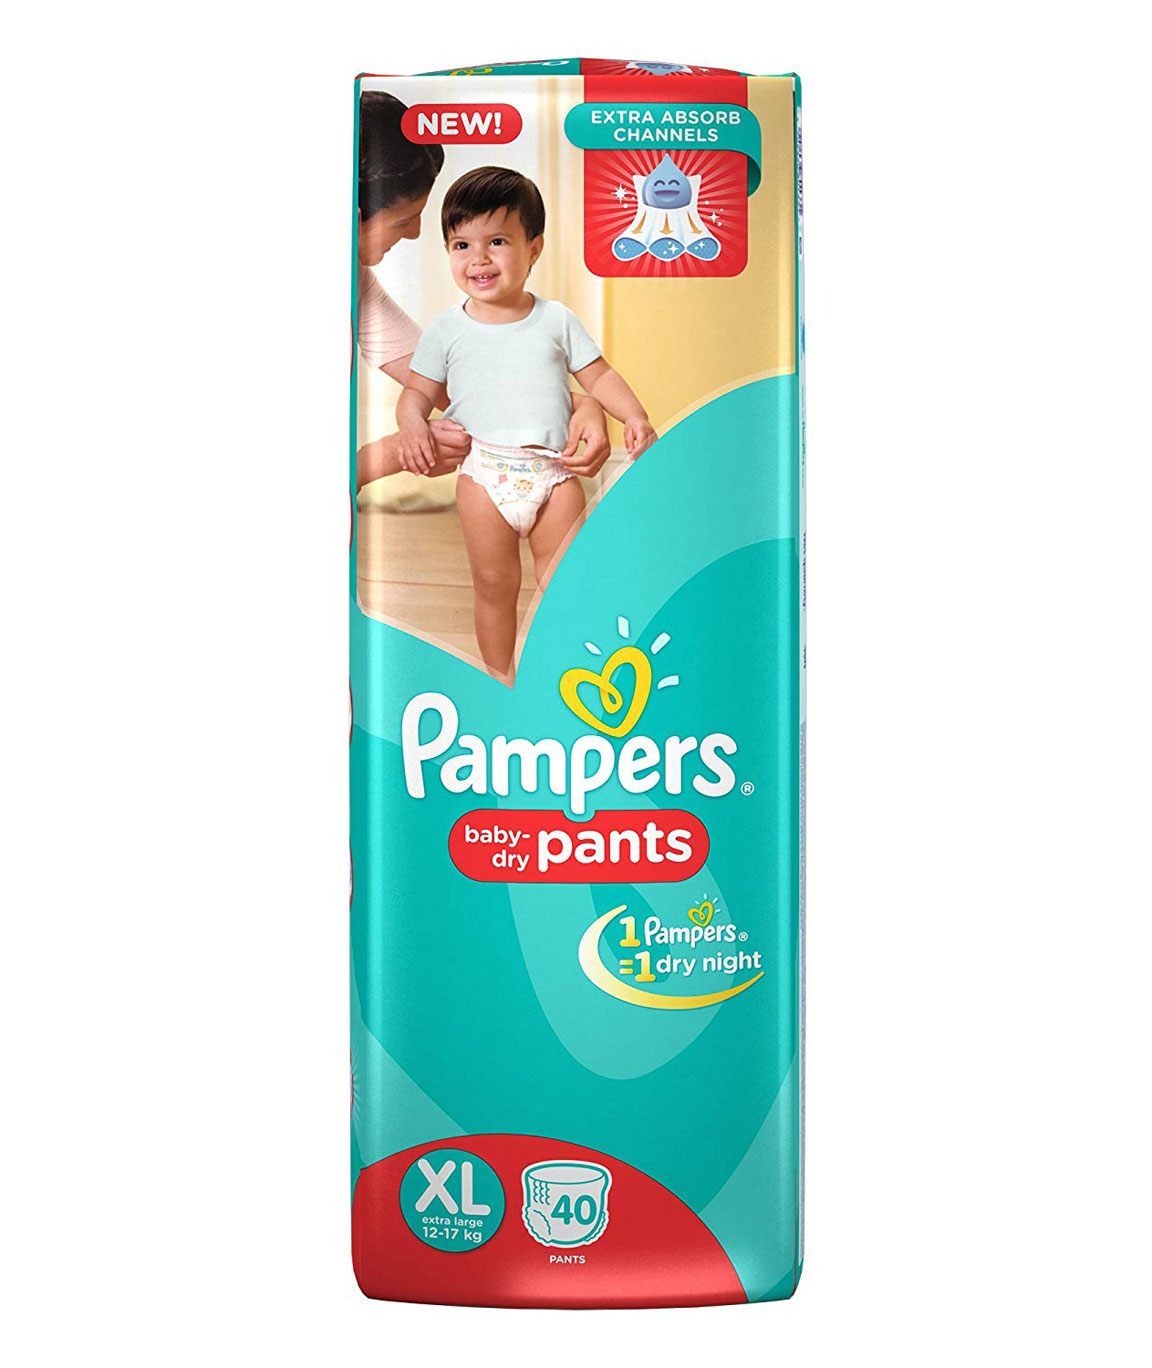 Buy Pampers® Baby-Dry™ Diaper Pants For Newborns Online - Pampers India